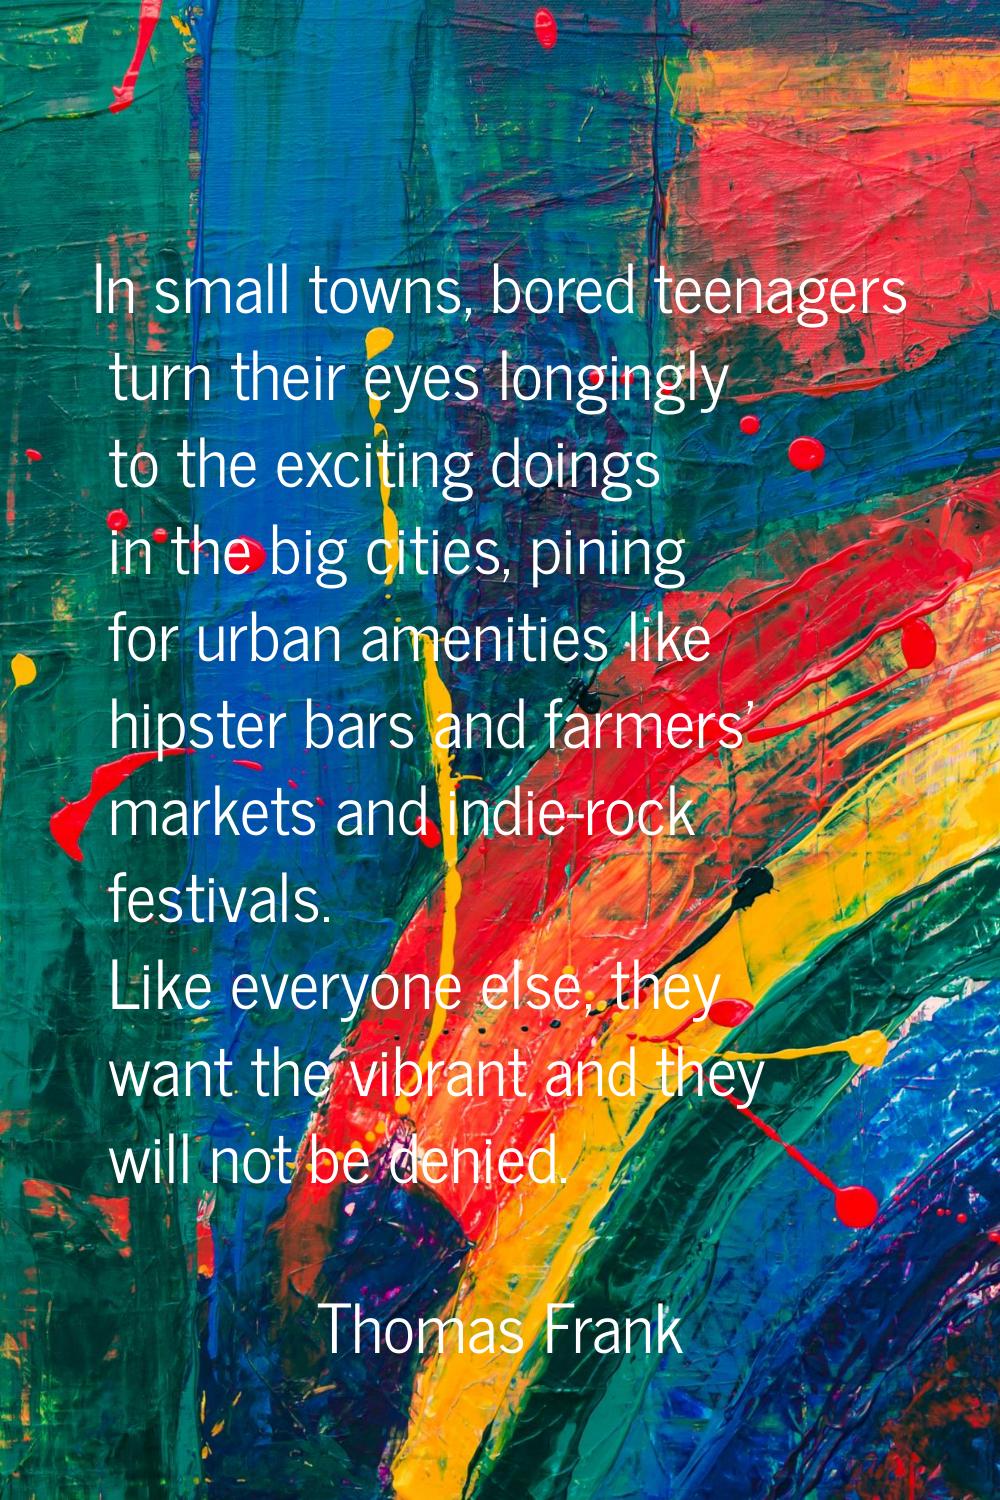 In small towns, bored teenagers turn their eyes longingly to the exciting doings in the big cities,